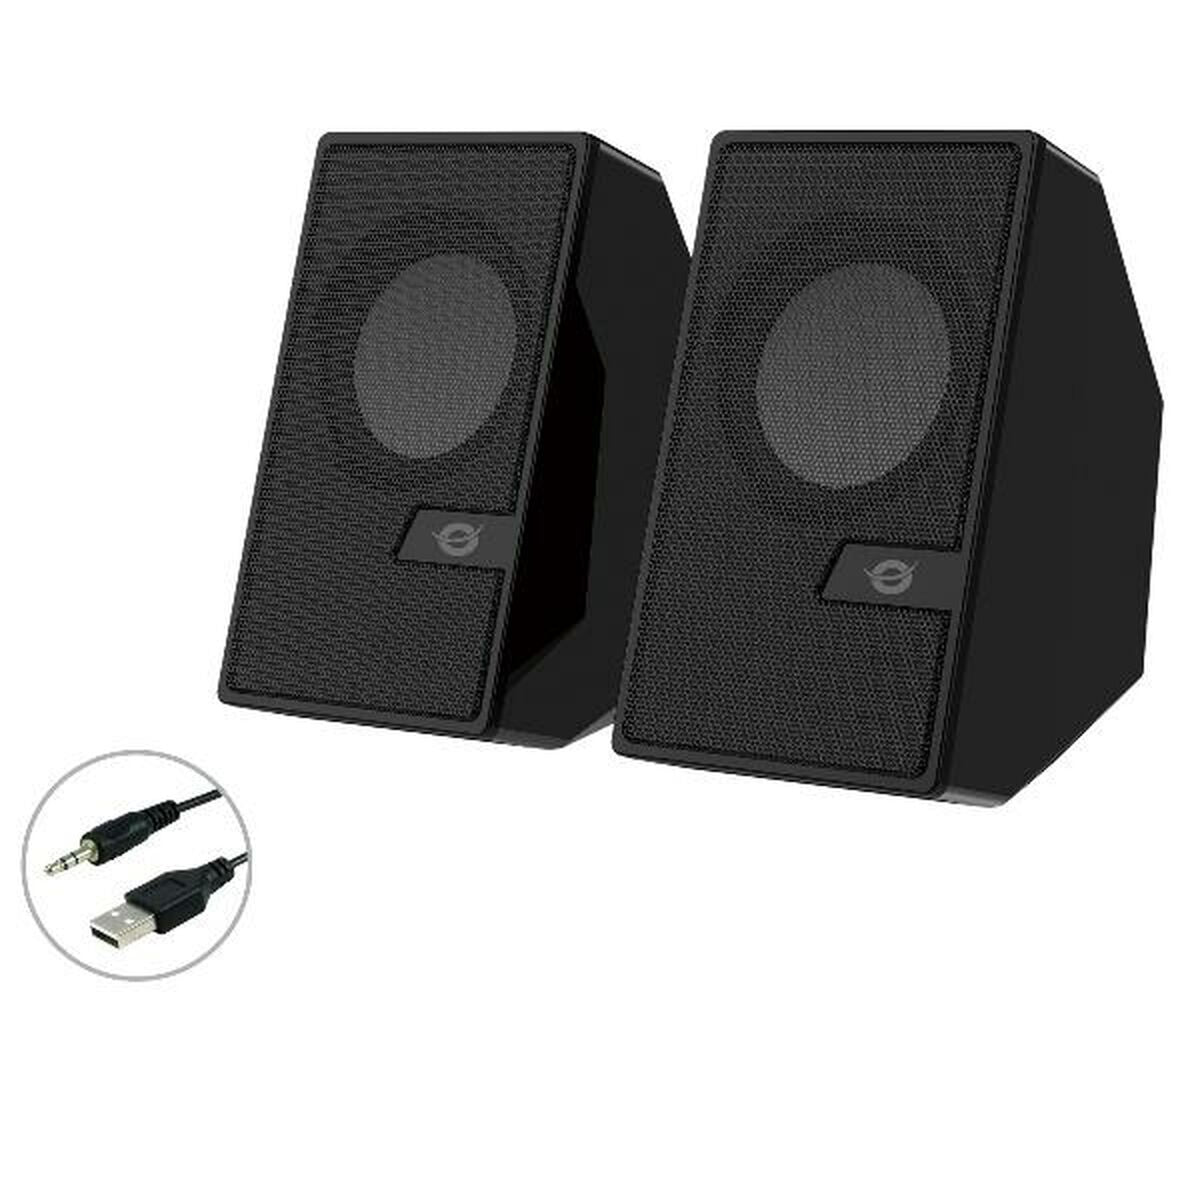 PC Speakers Conceptronic 120839307101, Conceptronic, Electronics, TV, Video and home cinema, pc-speakers-conceptronic-120839307101, Brand_Conceptronic, category-reference-2609, category-reference-2637, category-reference-2882, category-reference-t-18805, category-reference-t-19653, category-reference-t-19922, category-reference-t-21404, cinema and television, computers / components, Condition_NEW, entertainment, music, Price_20 - 50, RiotNook